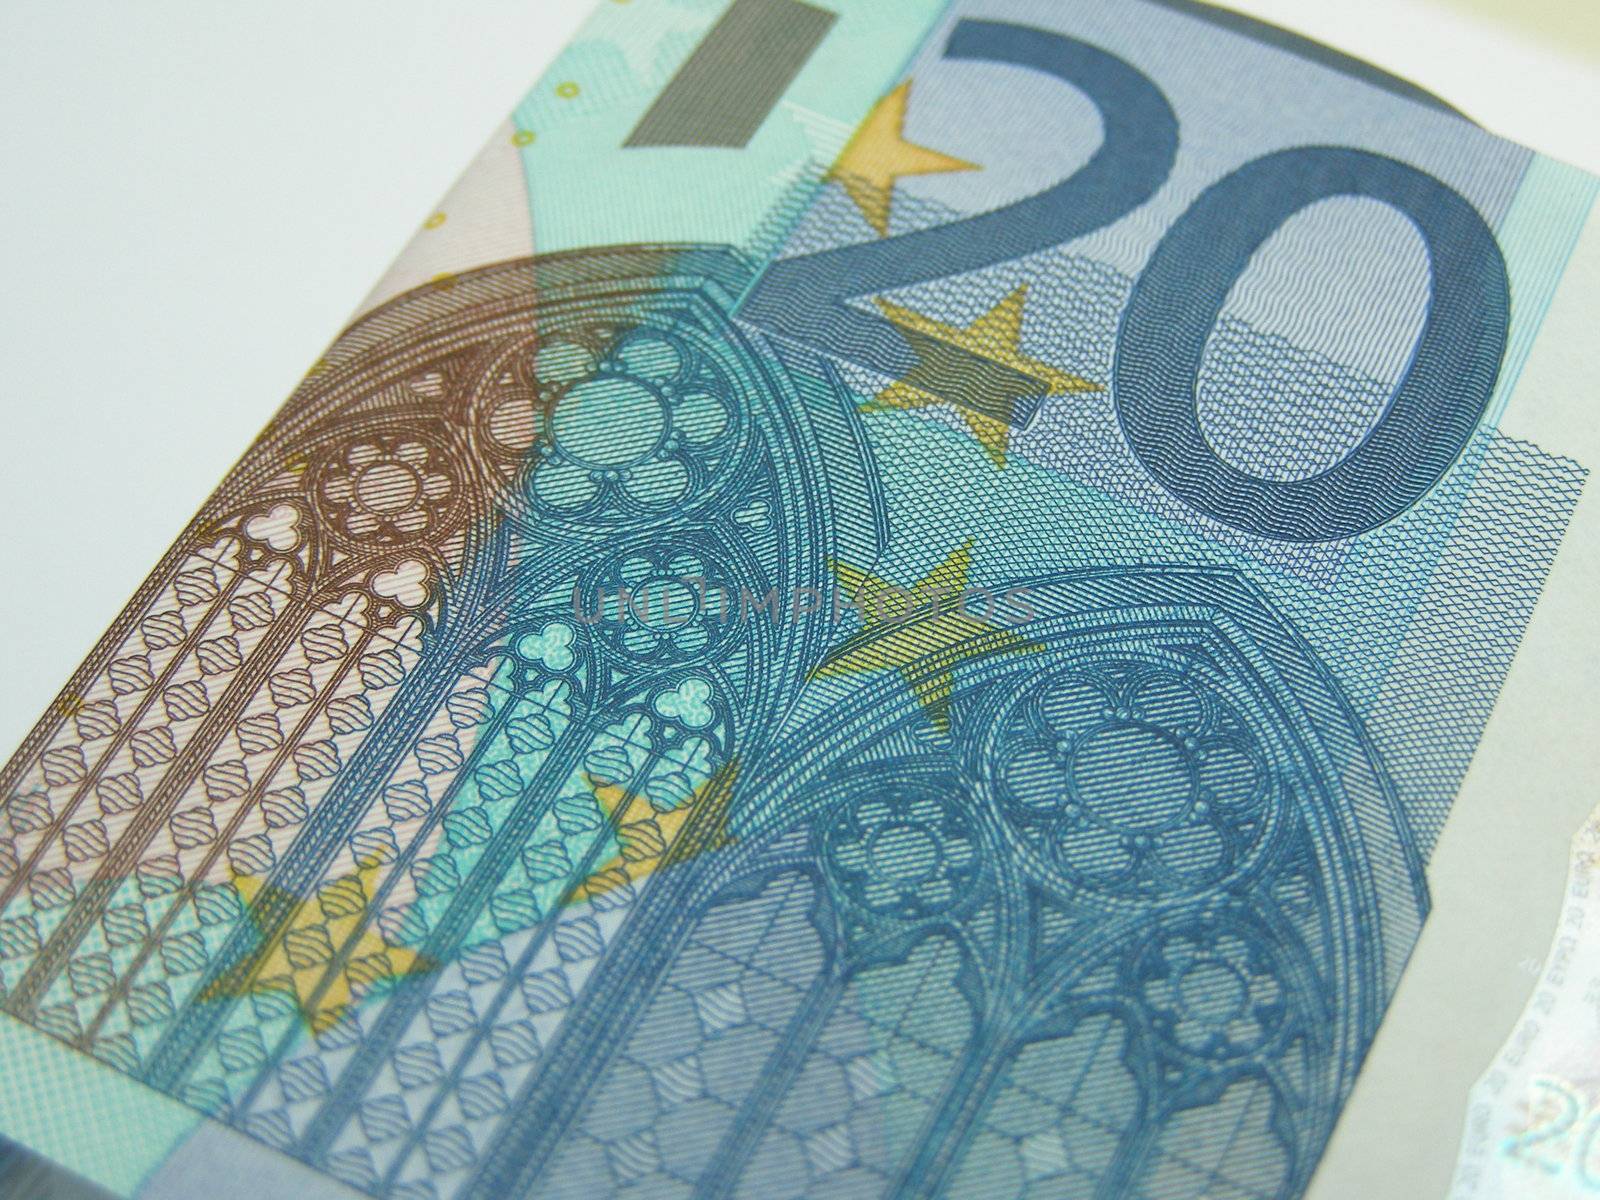 20 euro banknote with gothic windows depicted on it